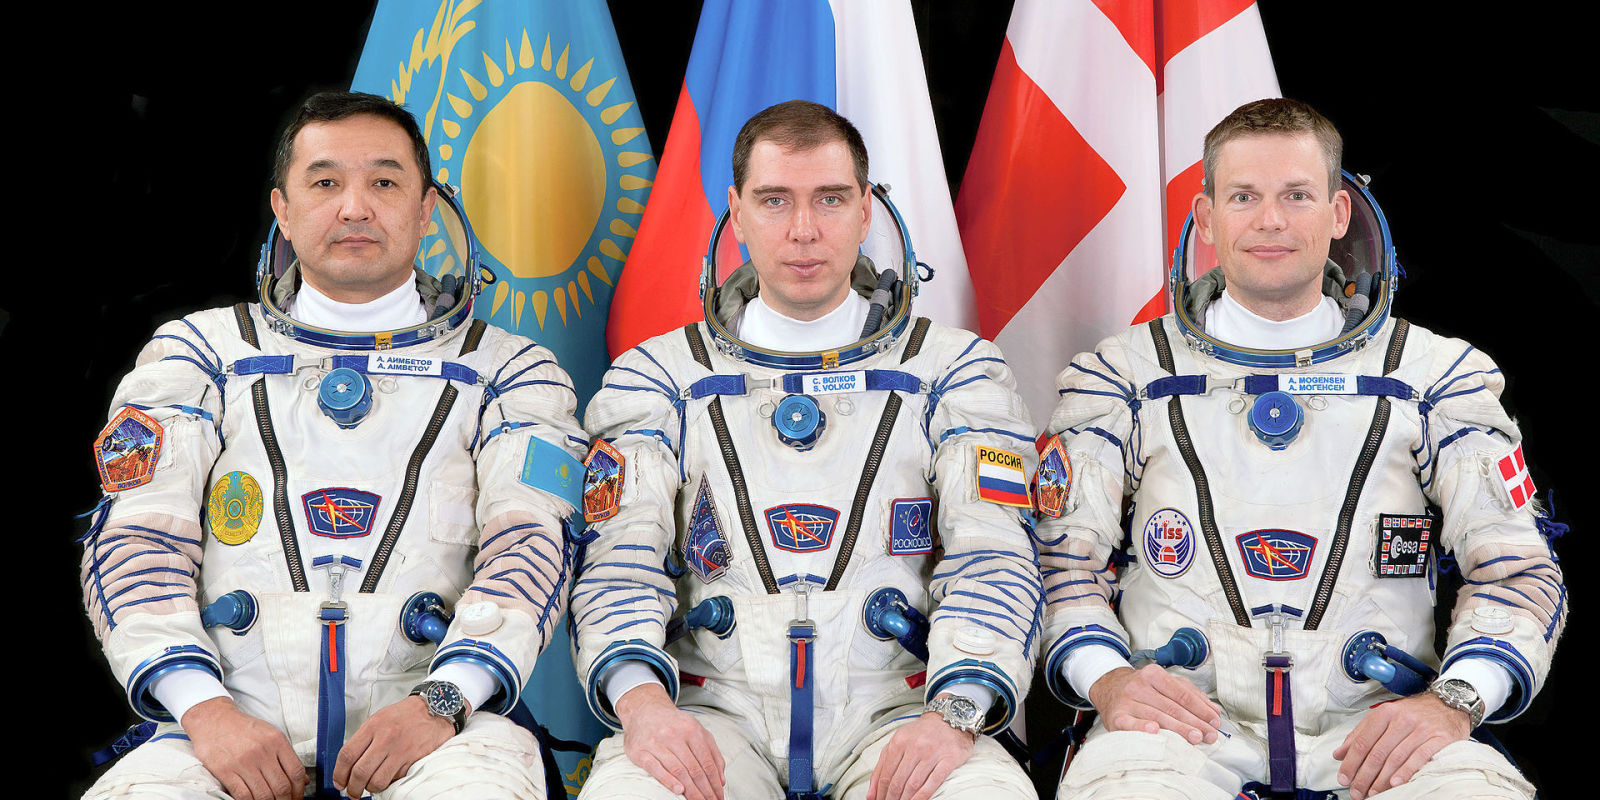 Expedition 45 launches to the ISS tonight